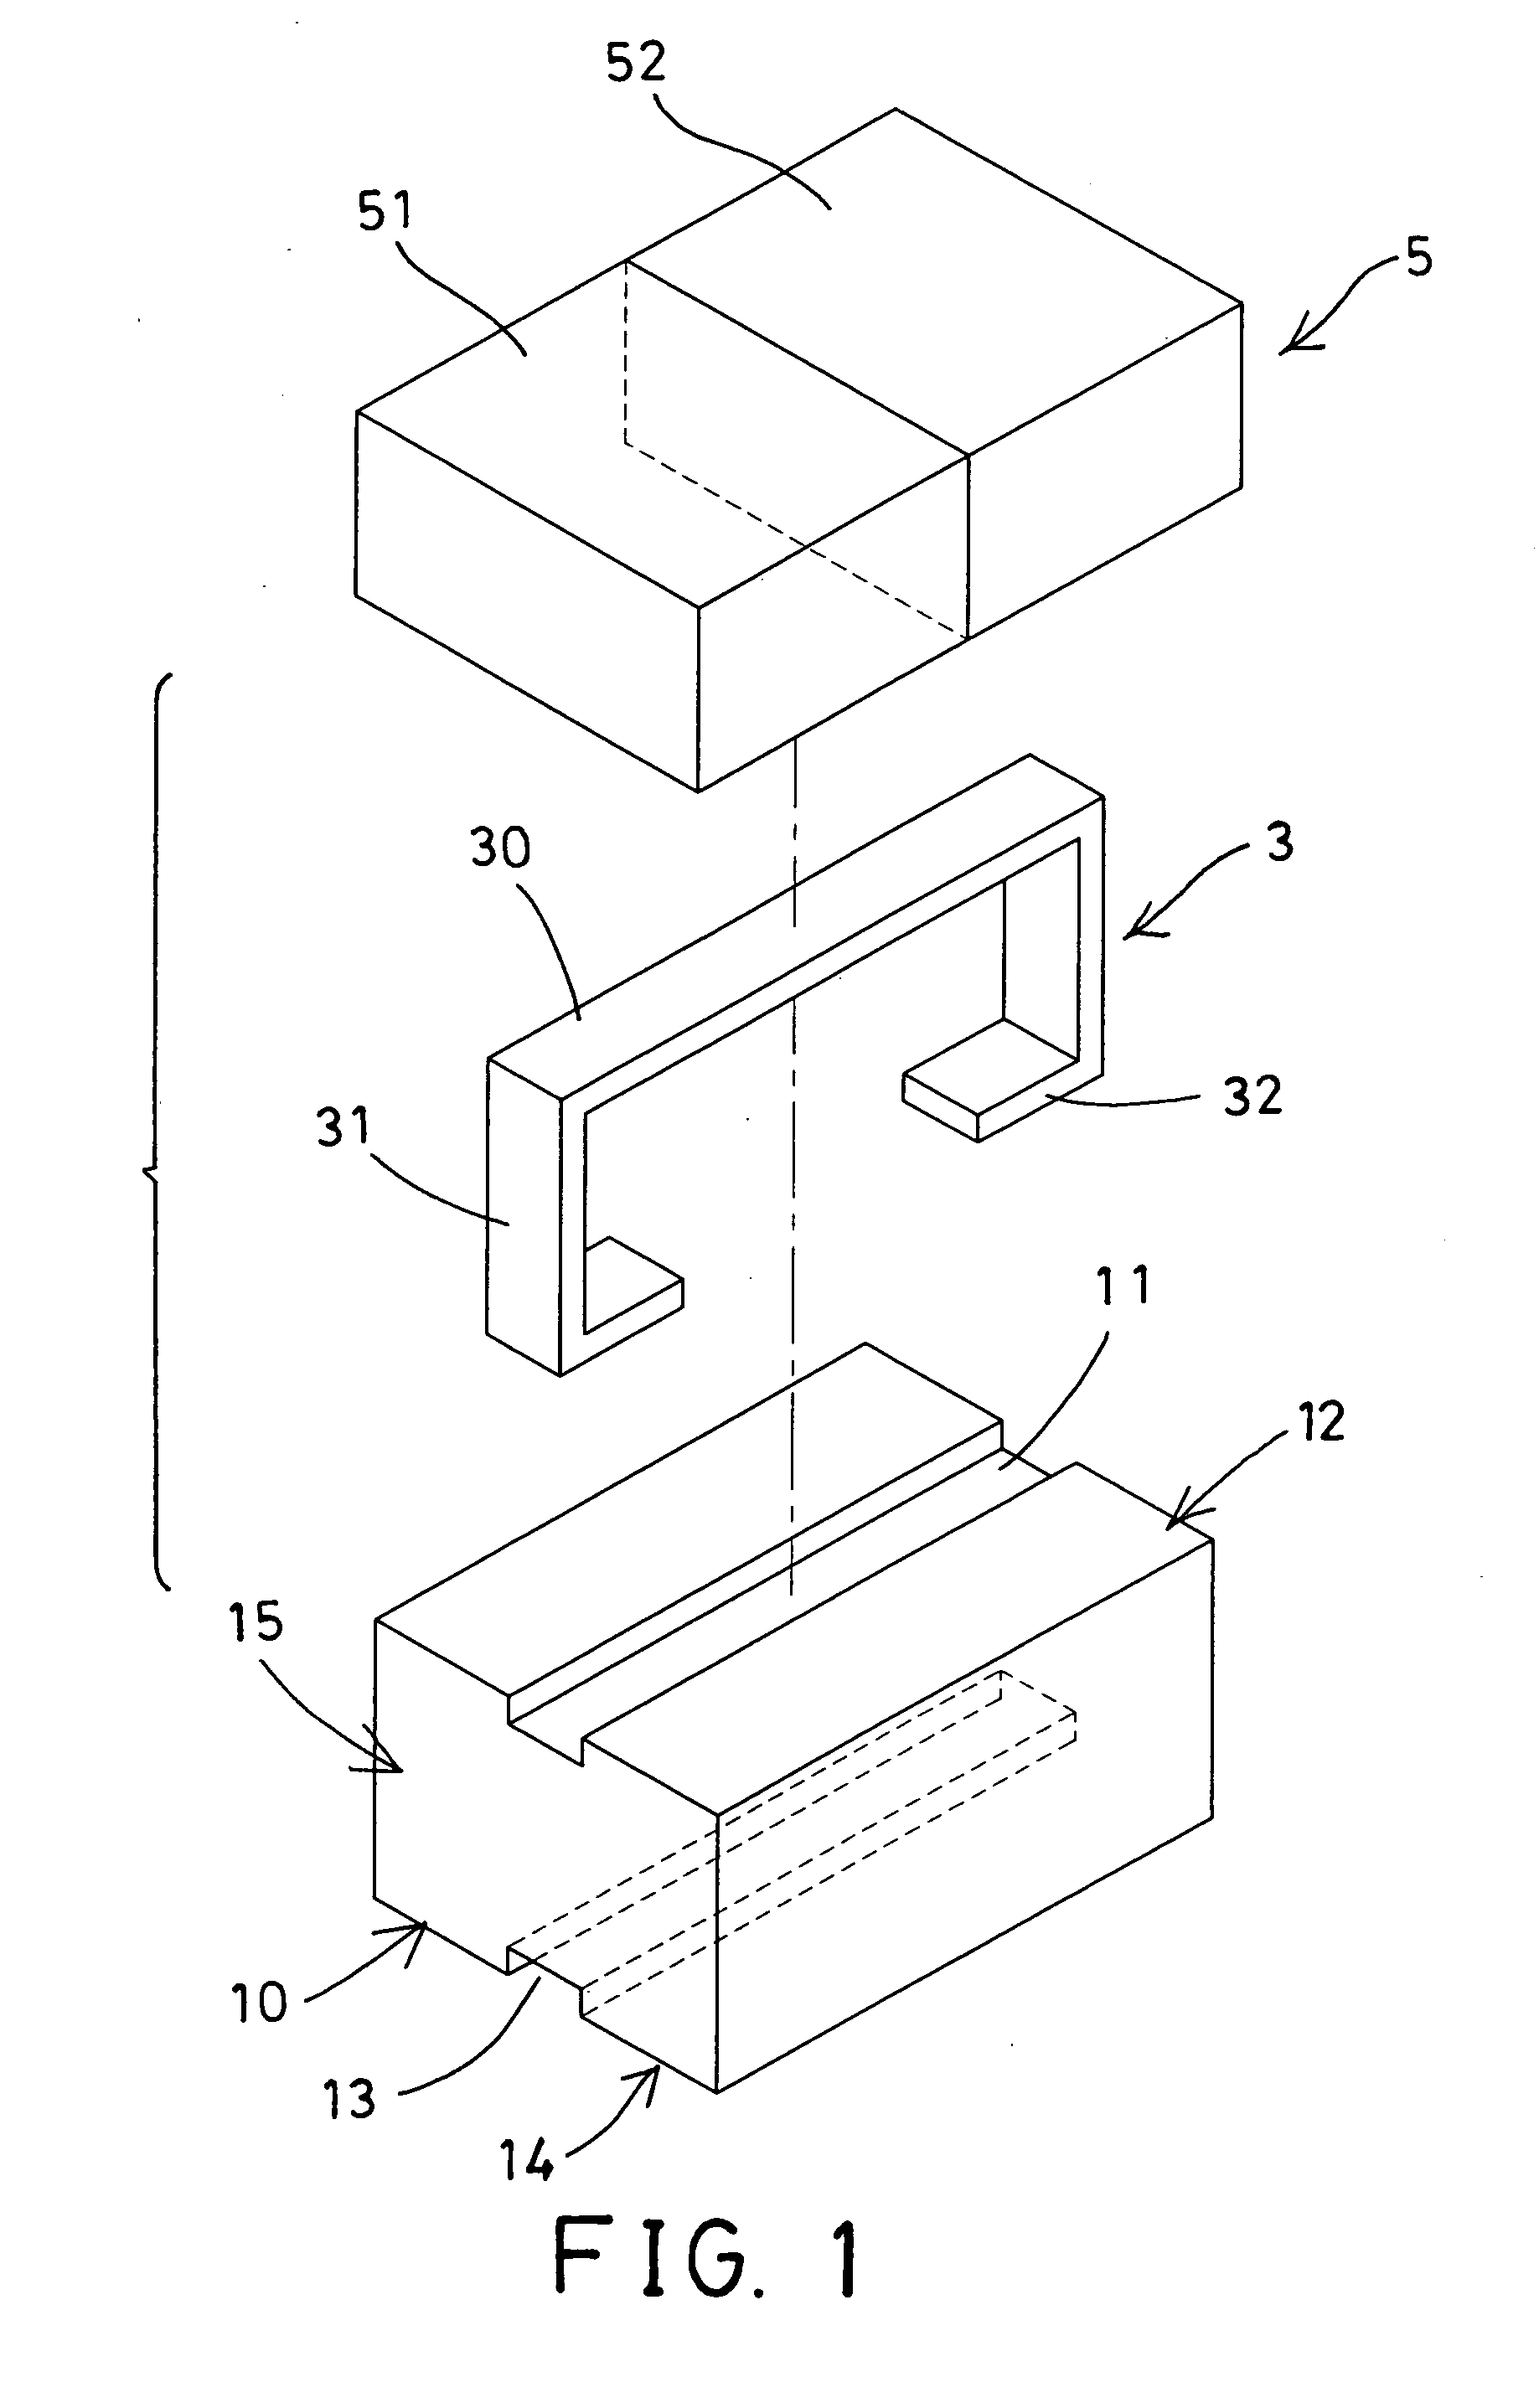 Inductor having different currents for different loads